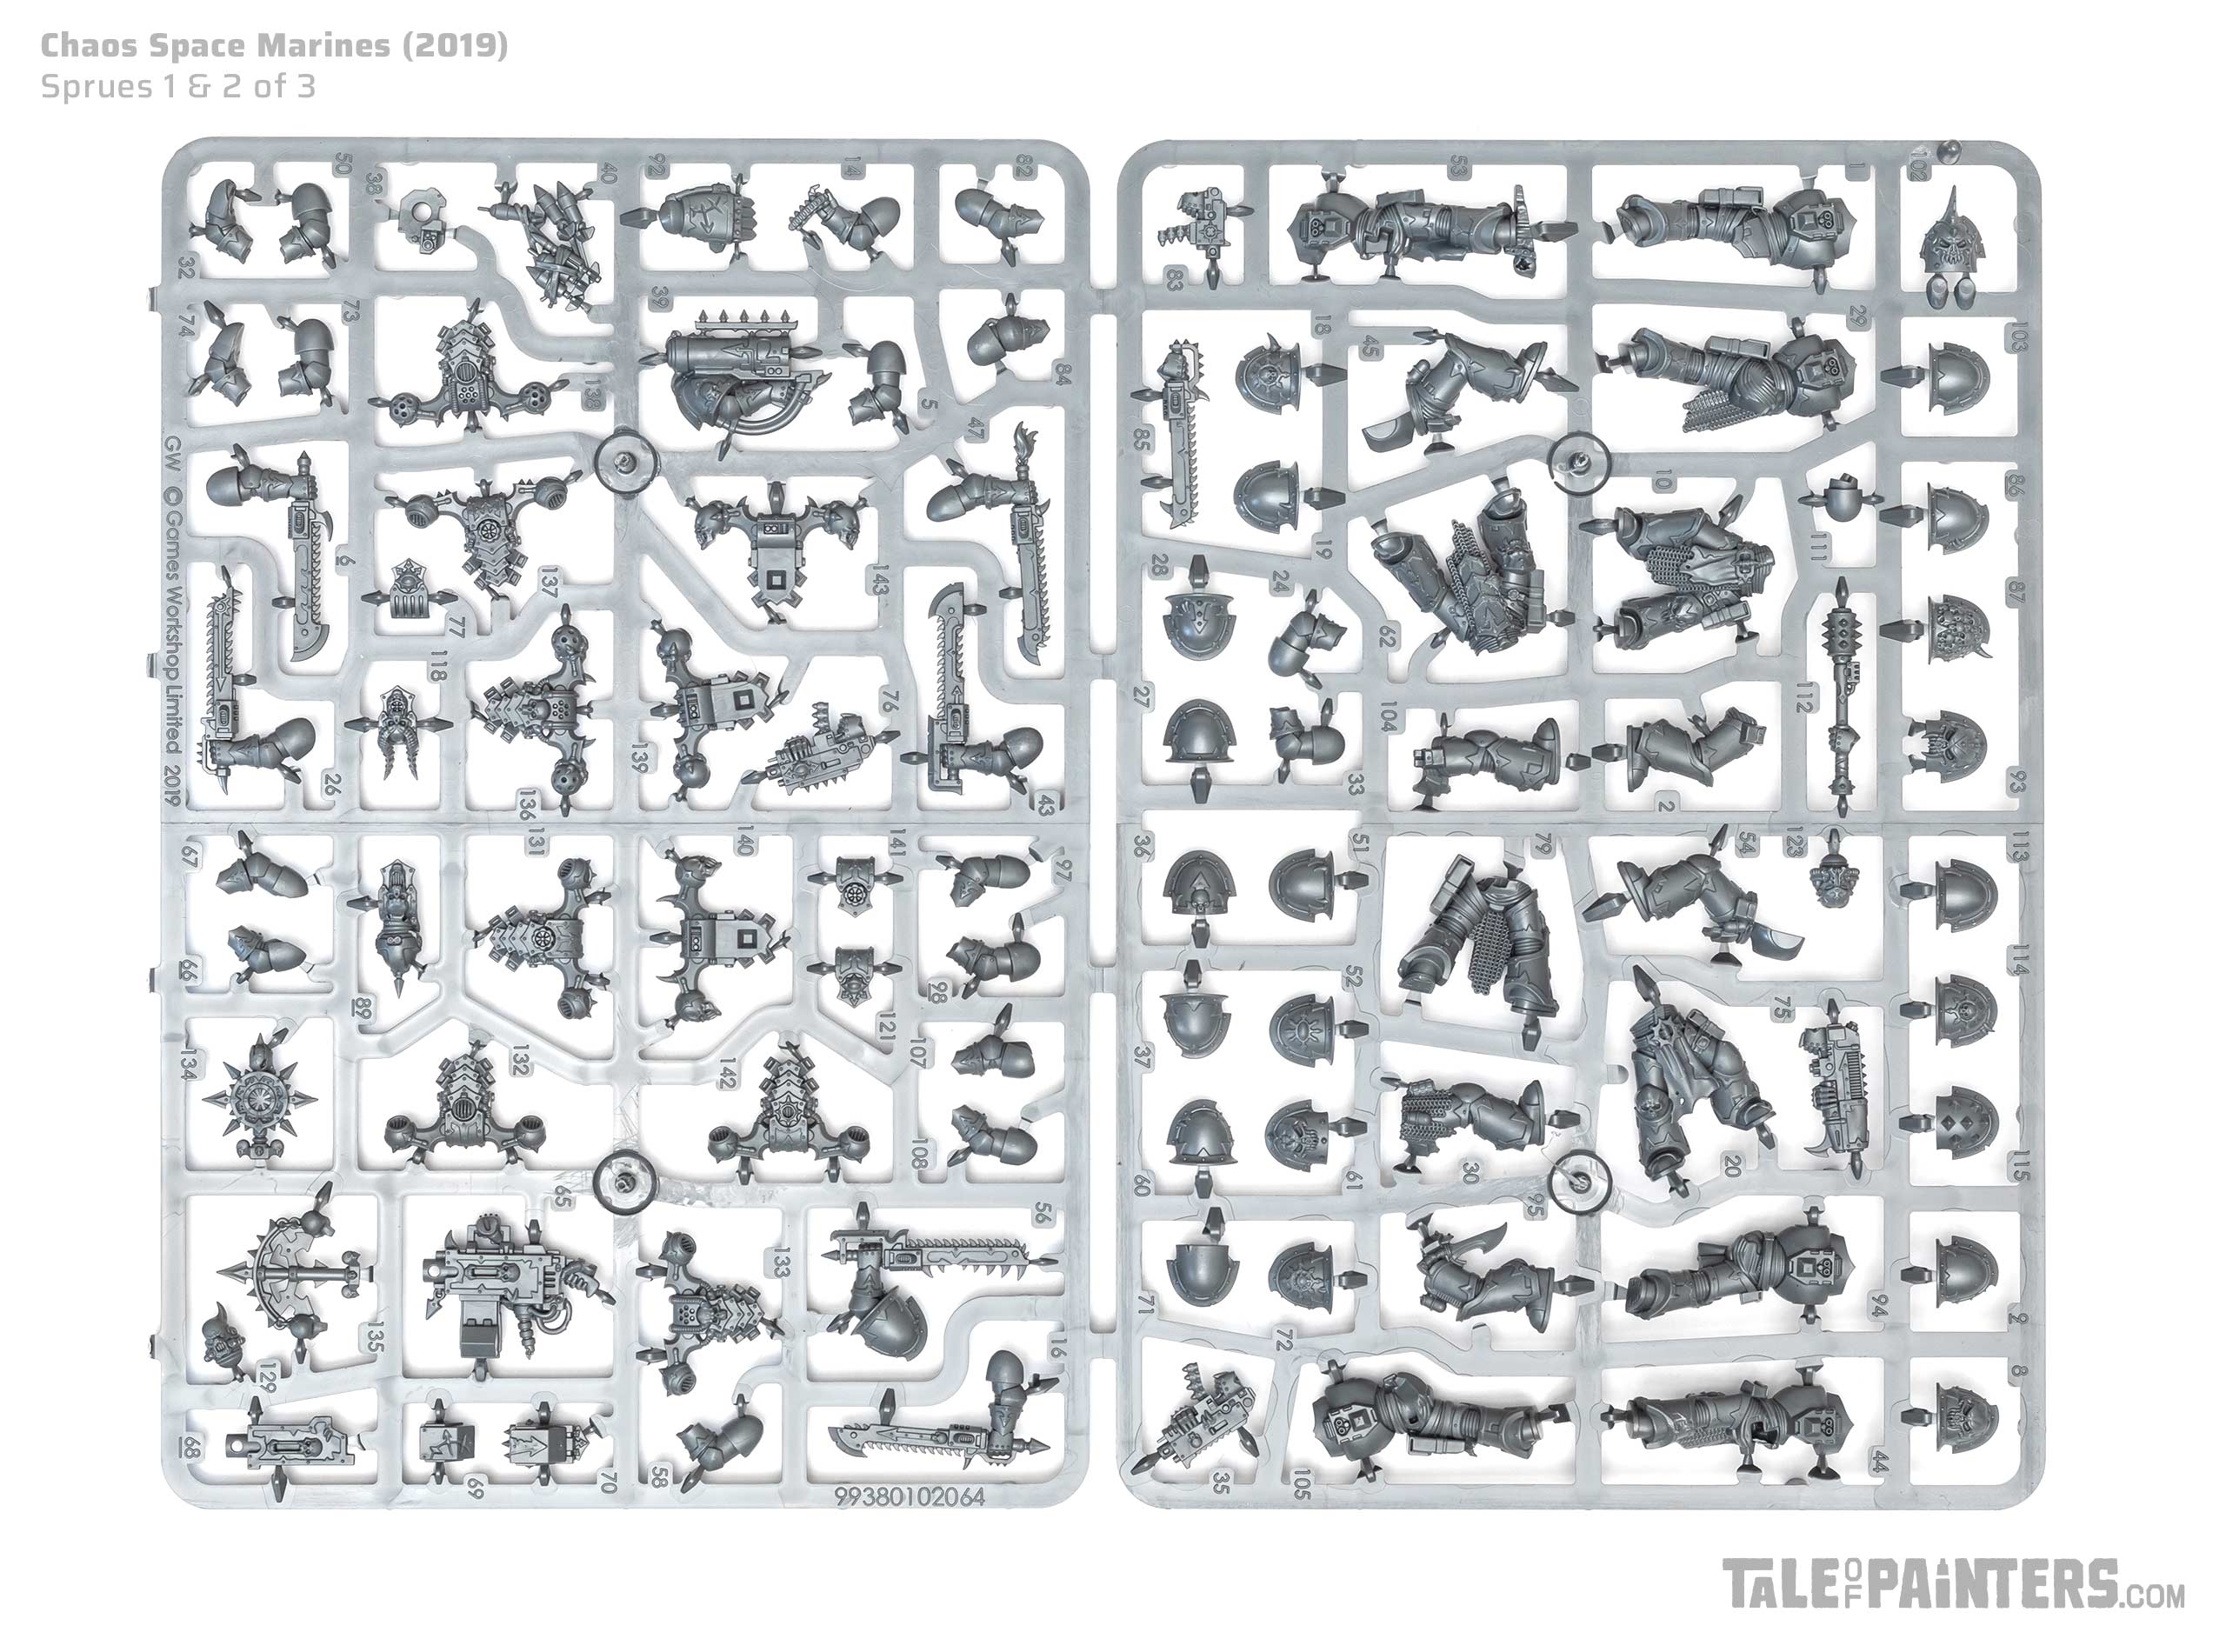 Chaos Space Marines sprues 1 and 2 from Kill Team: Nightmare